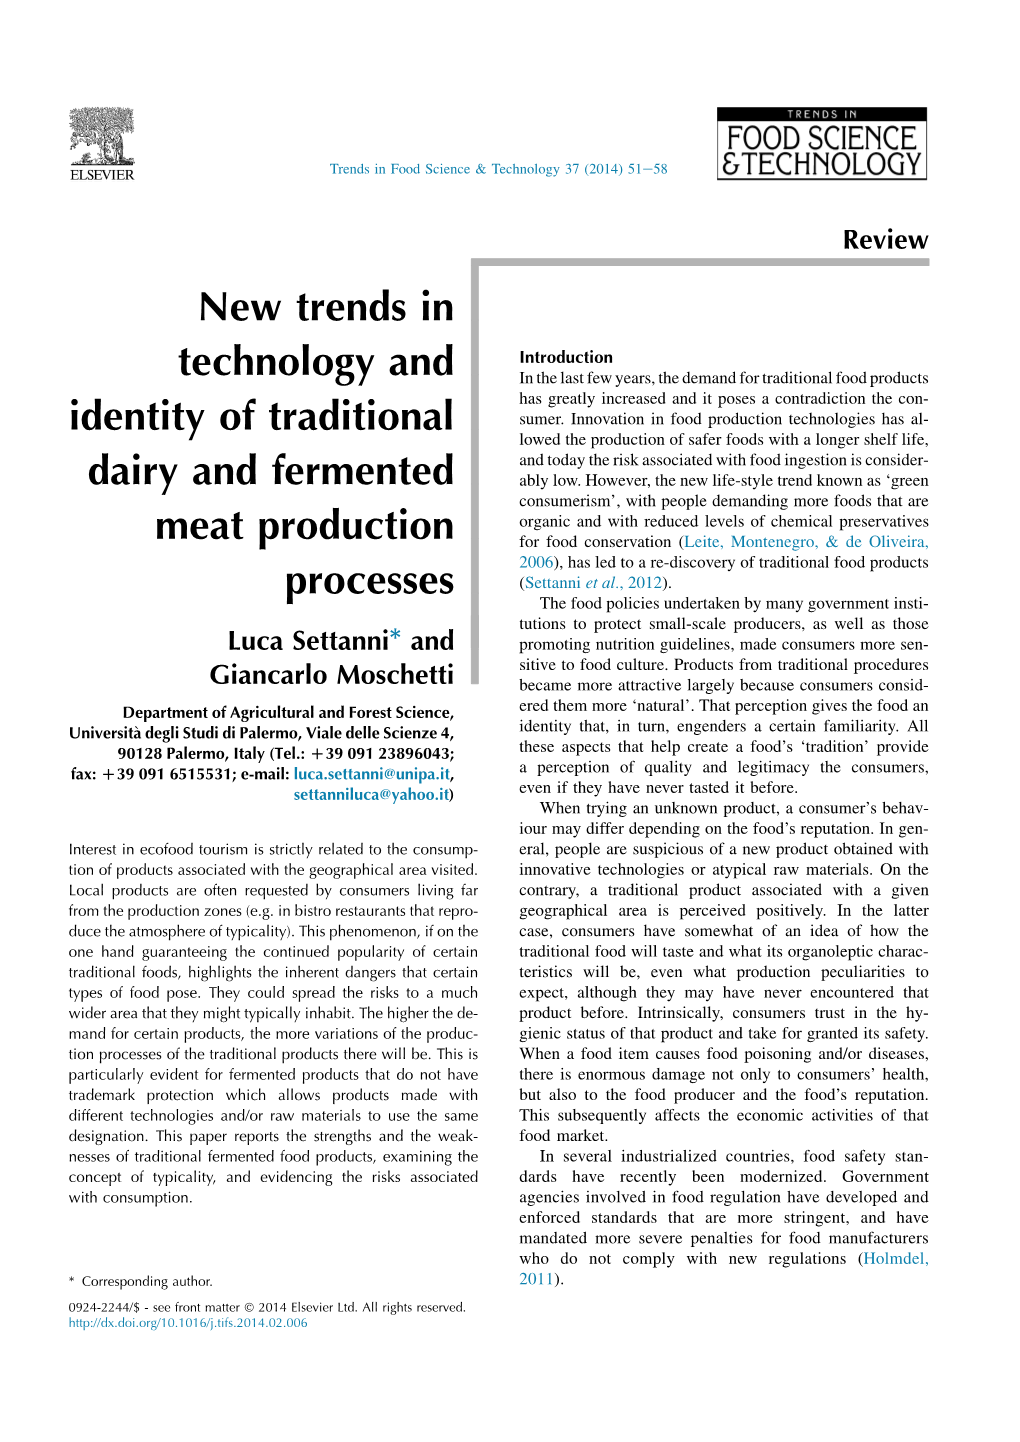 New Trends in Technology and Identity of Traditional Dairy and Fermented